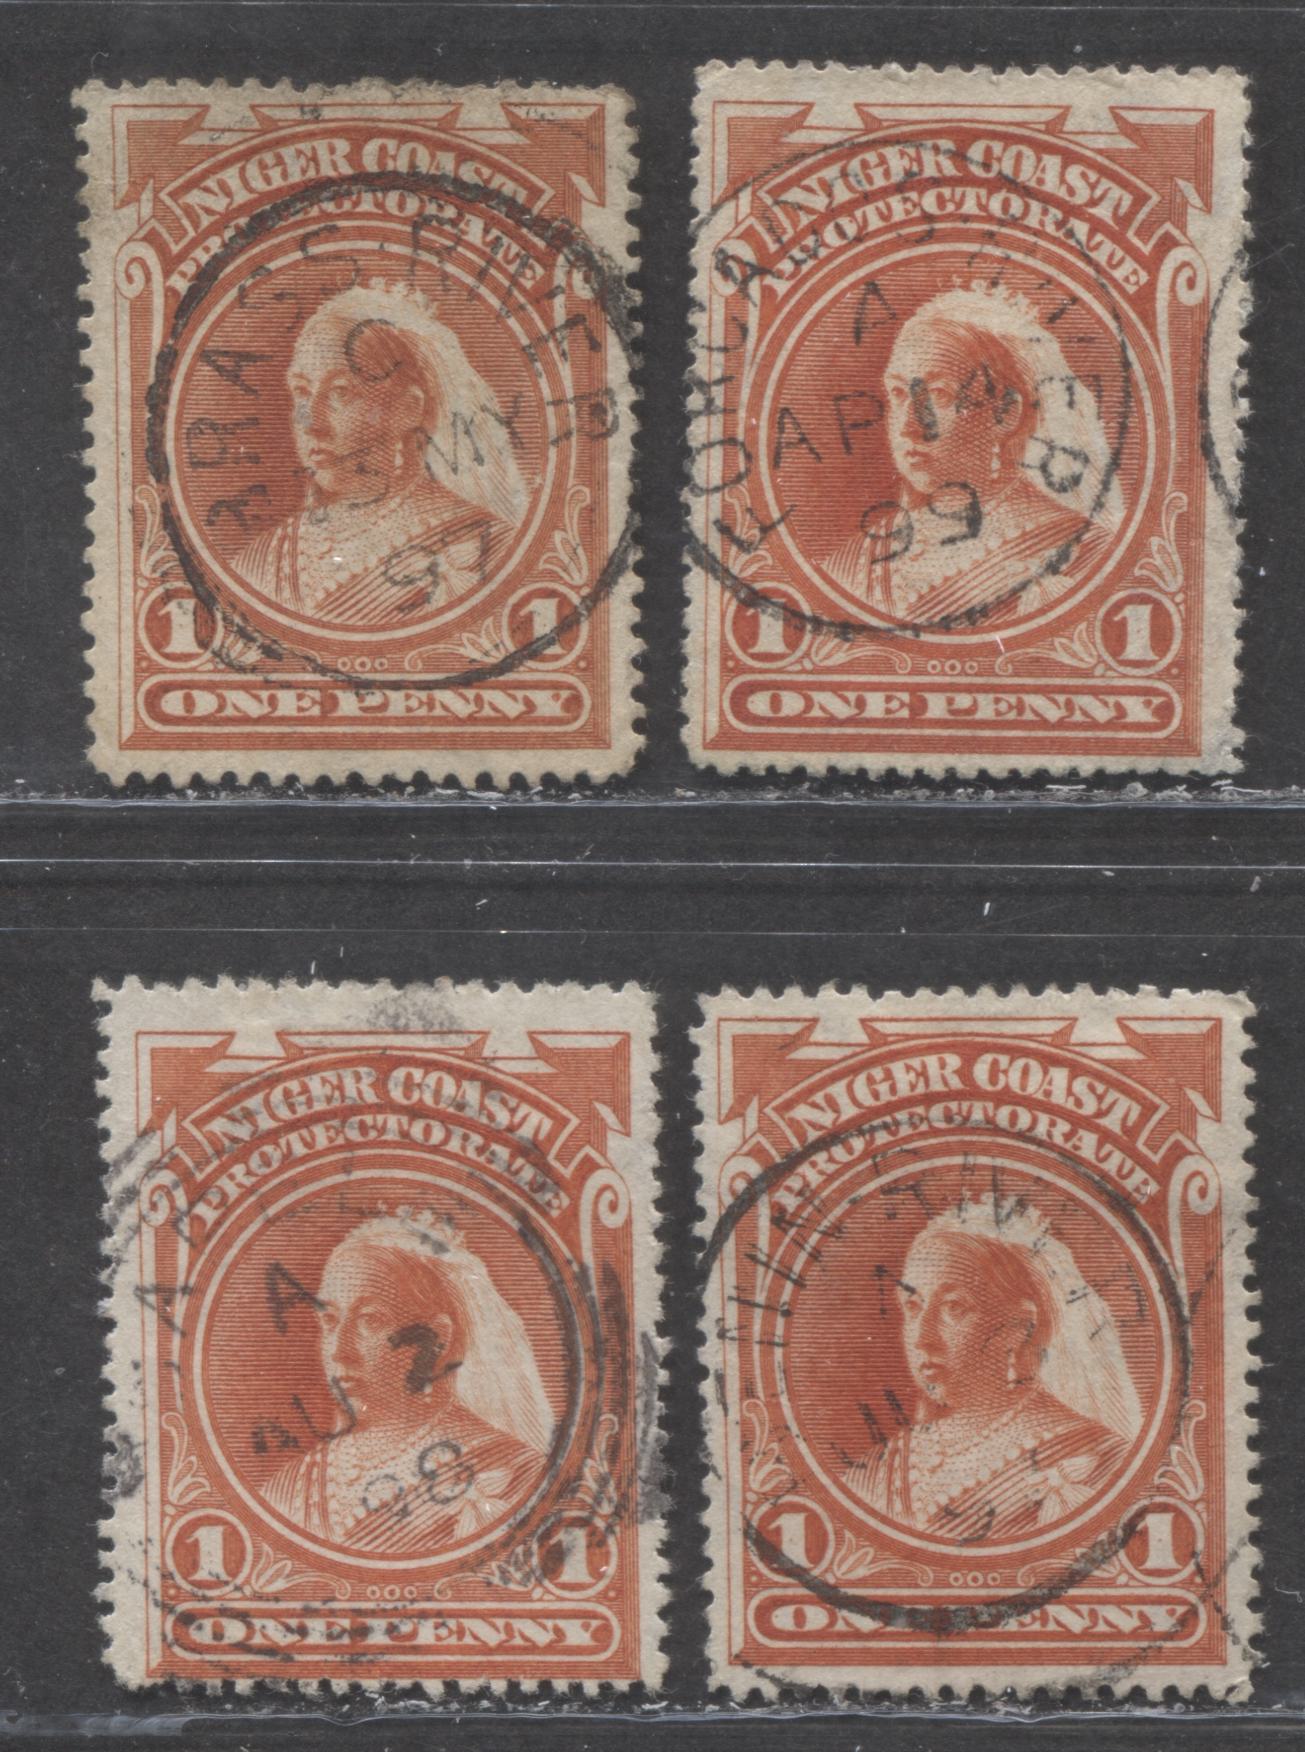 Lot 232 Niger Coast SC#56(SG#67,67a,67c) One Penny Vermillion, Orange Vermillion 1897 - 1898 Watermarked Issue, Perf 14.5 - 15 and Perf 15.5 - 16., A Fine Used Example, Click on Listing to See ALL Pictures, Estimated Value $10 USD